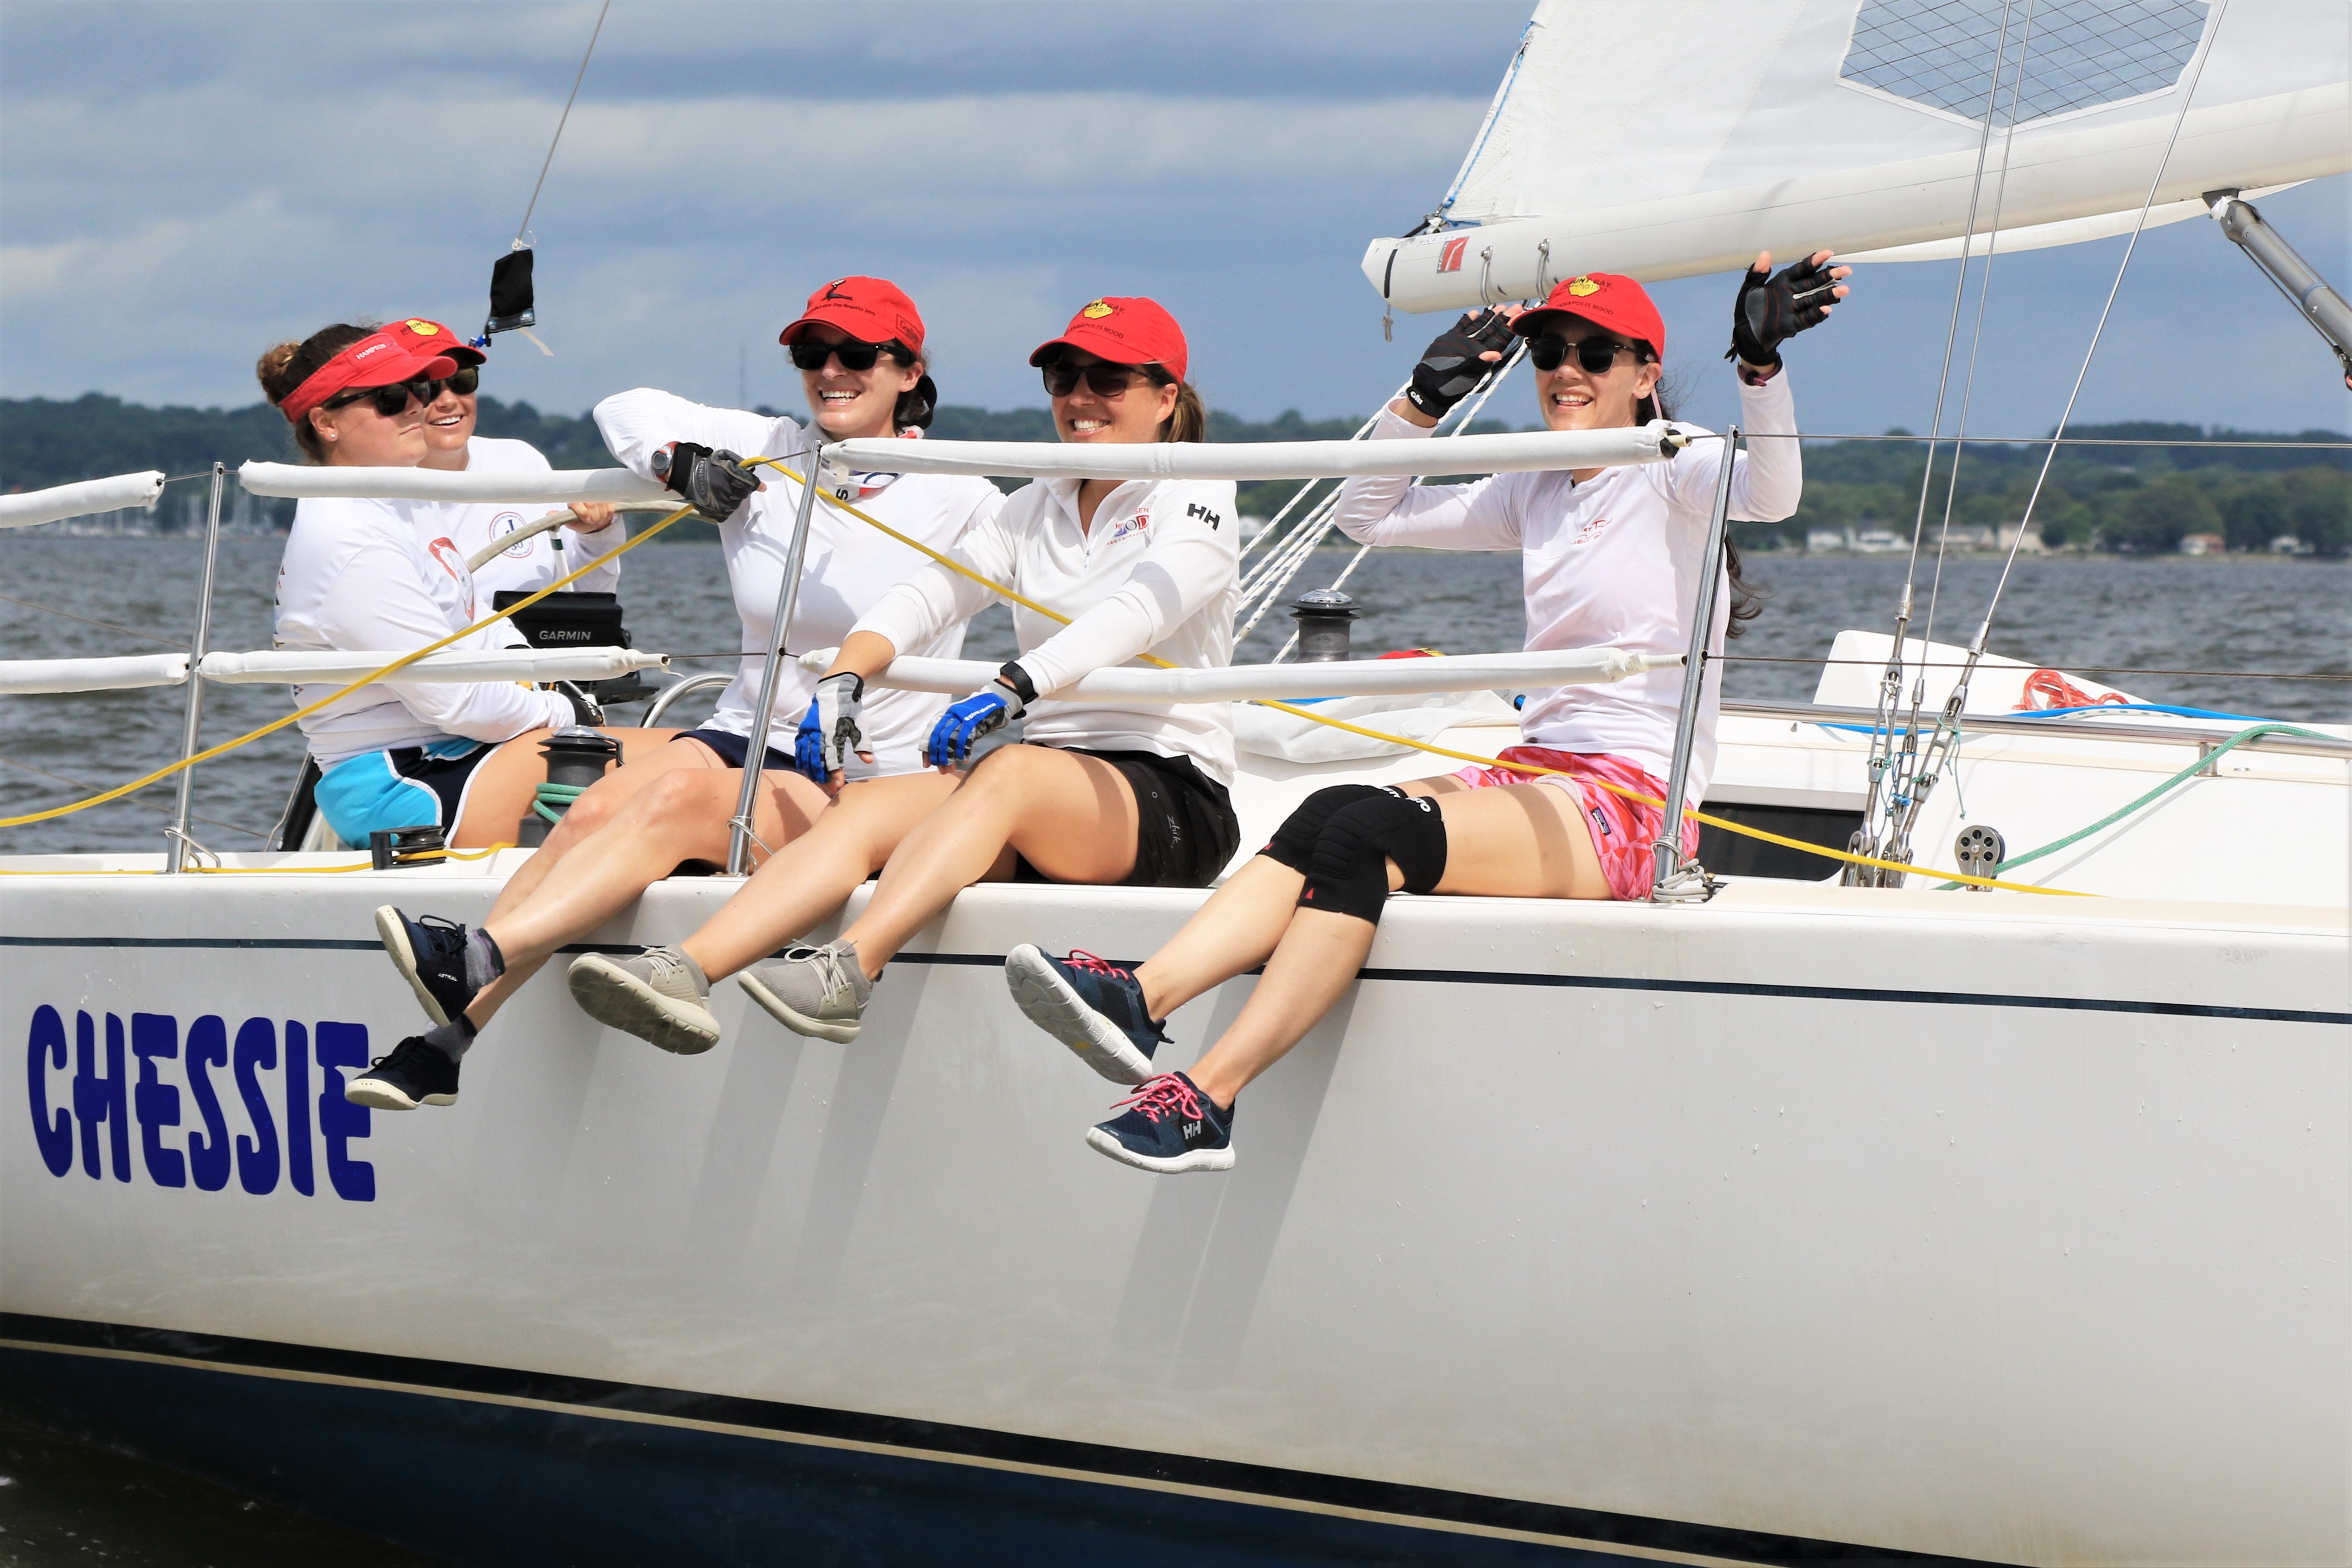 Why Are There Not More Options for Women's Sailing Clothing?